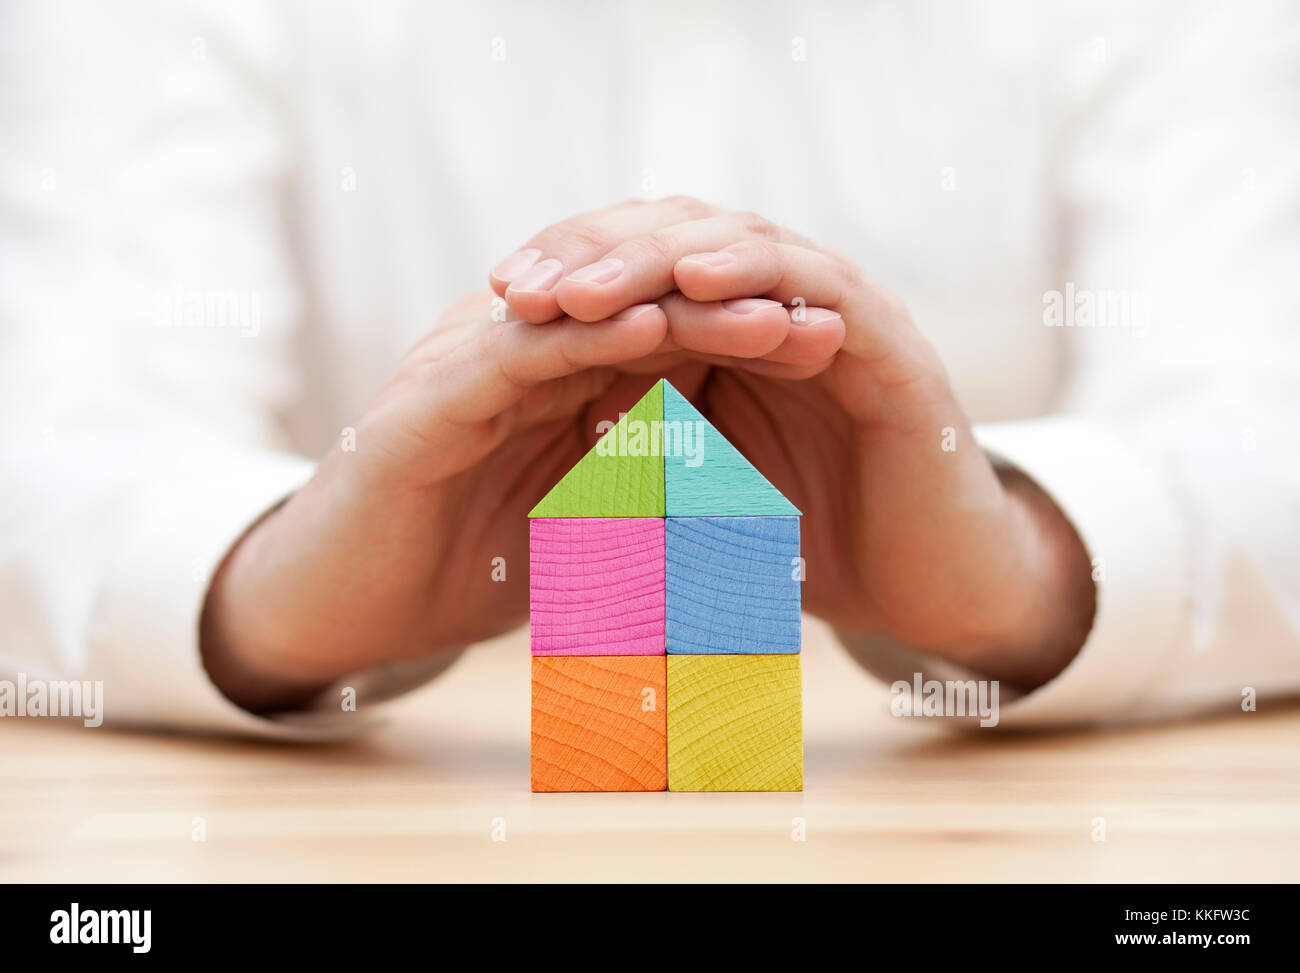 Colorful wooden block house protected by hands Stock Photo